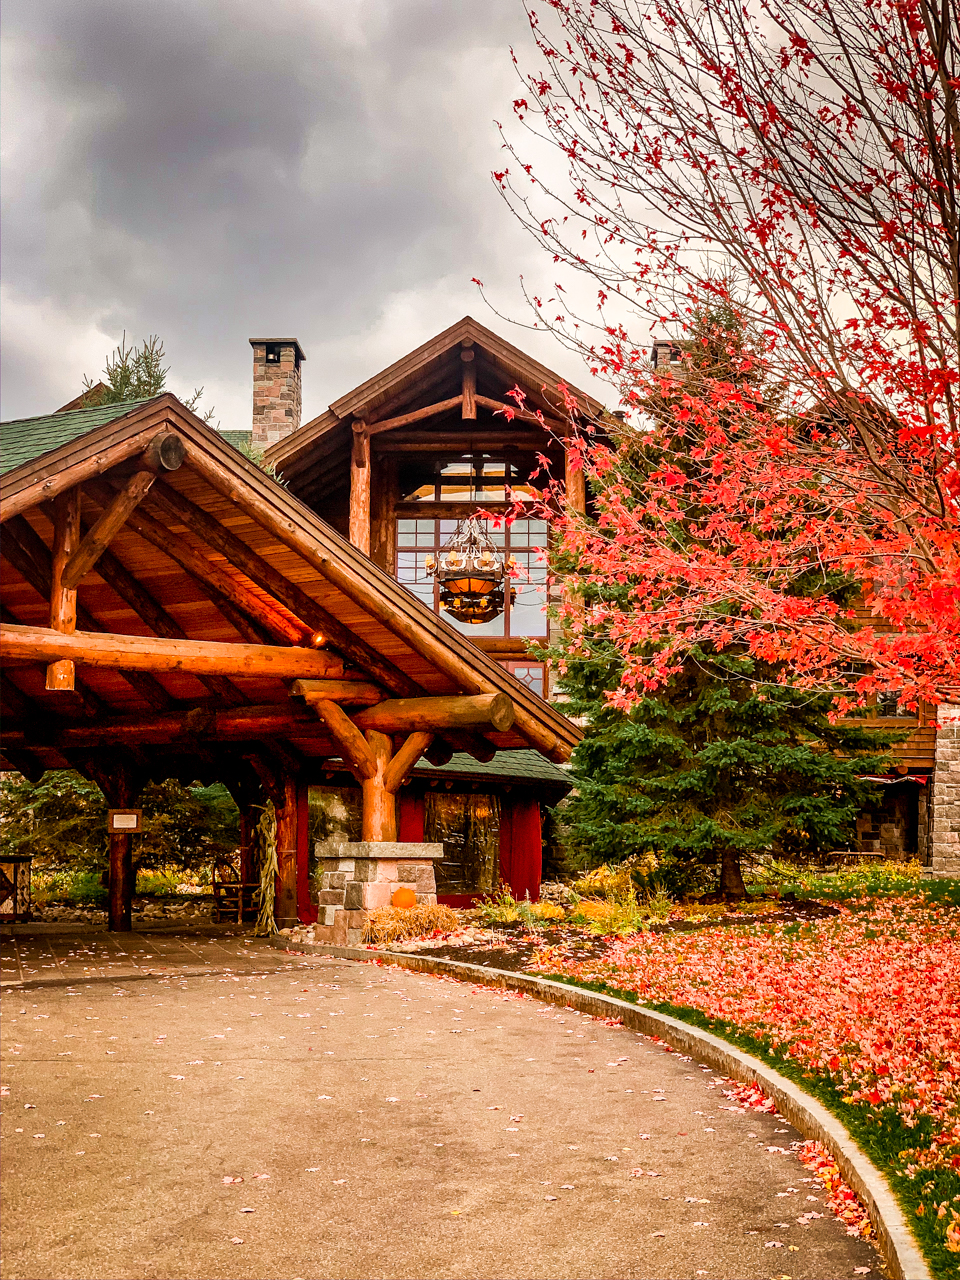 Where to Stay in the Adirondacks: The Whiteface Lodge in Lake Placid